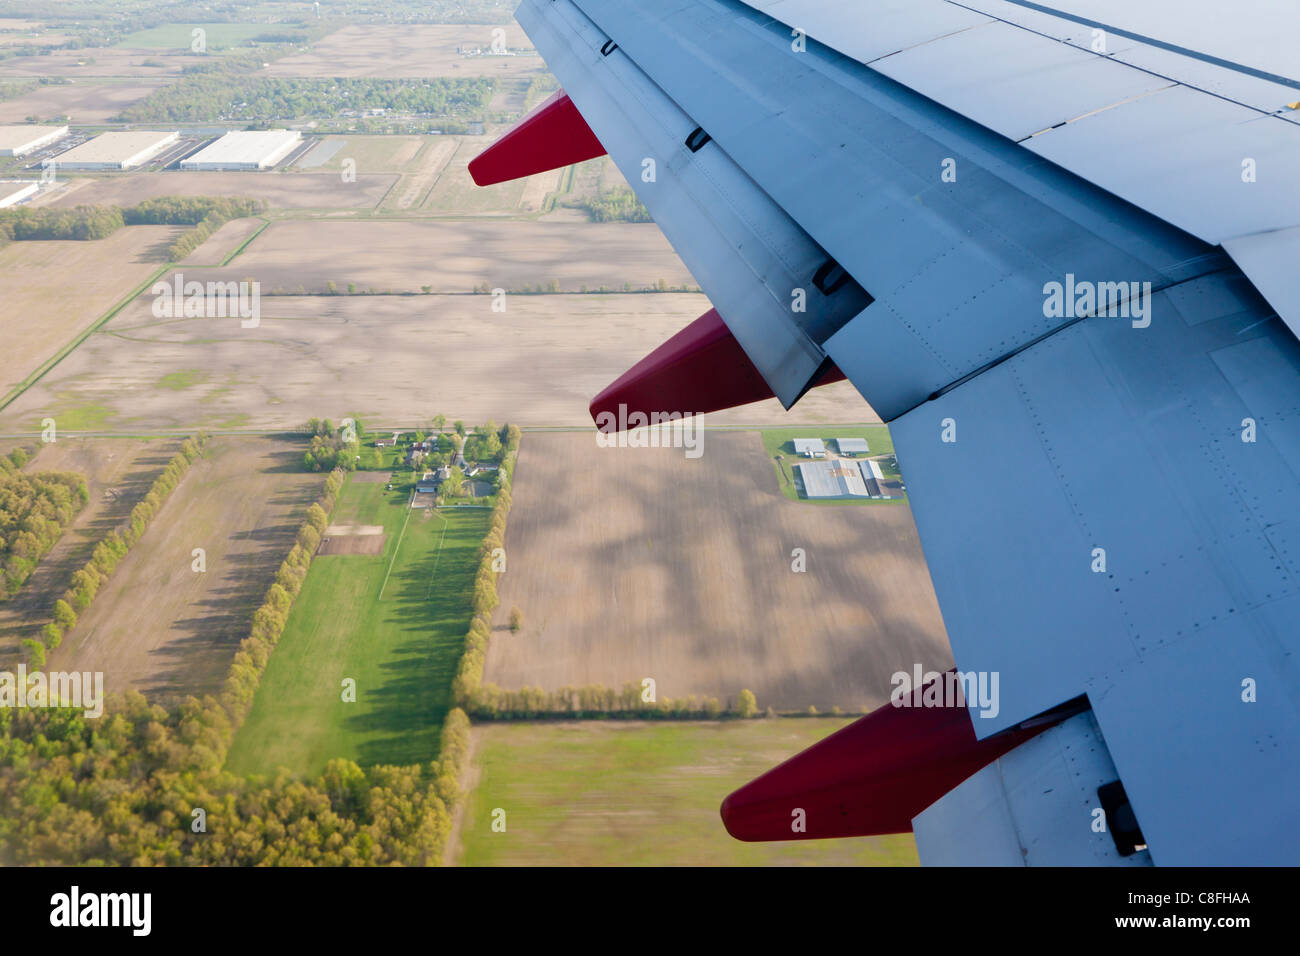 Southwest jet wing with flaps down over rural area near Columbus, Ohio Stock Photo